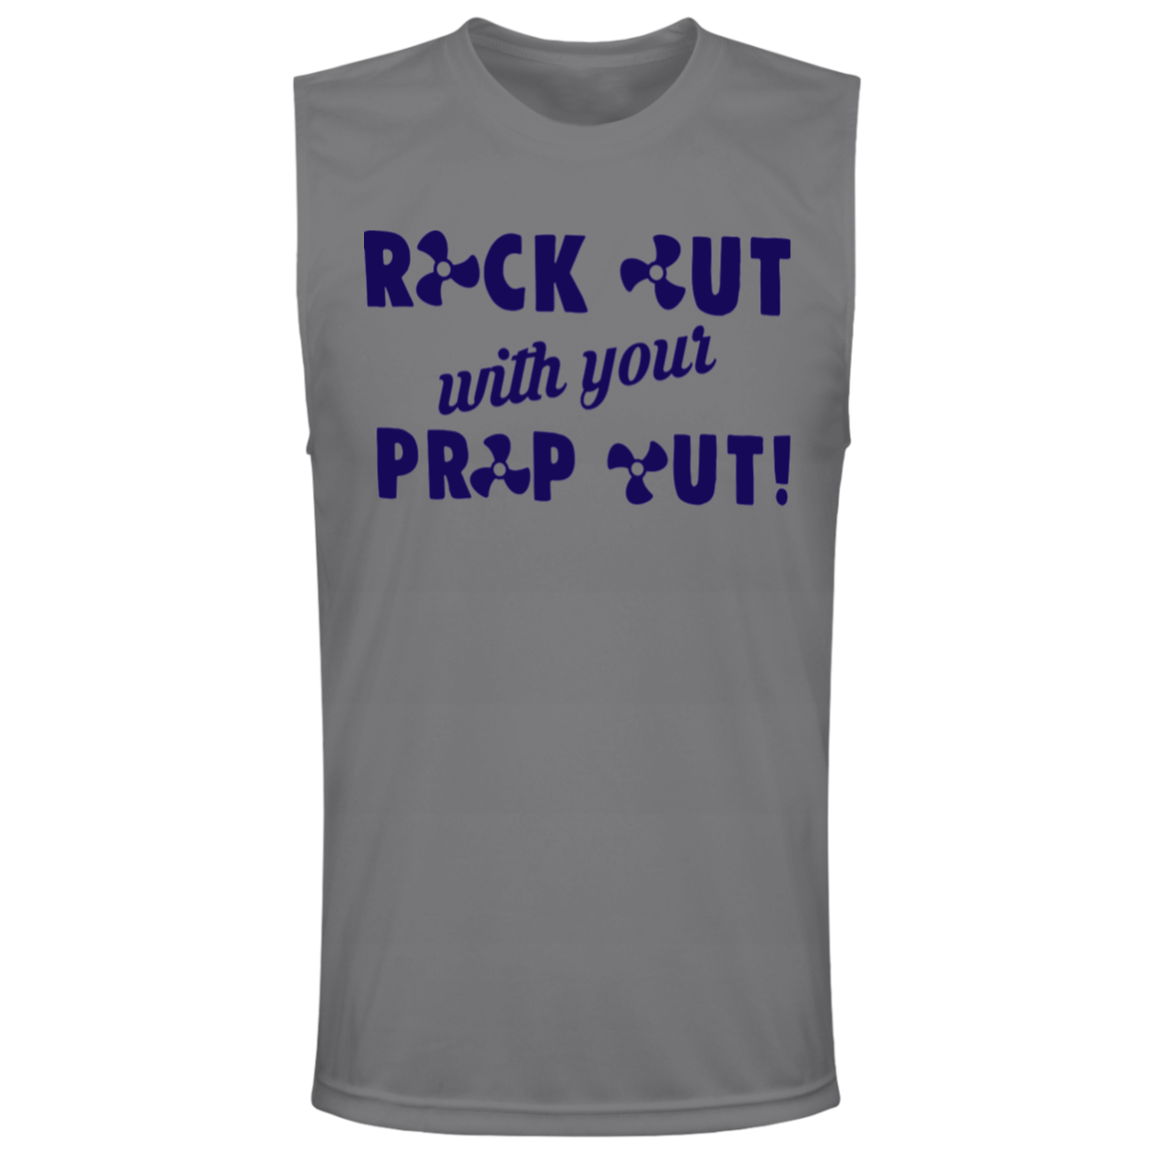 ***2 SIDED***  HRCL FL - Navy Rock Out with your Prop Out - - 2 Sided - UV 40+ Protection TT11M Team 365 Mens Zone Muscle Tee